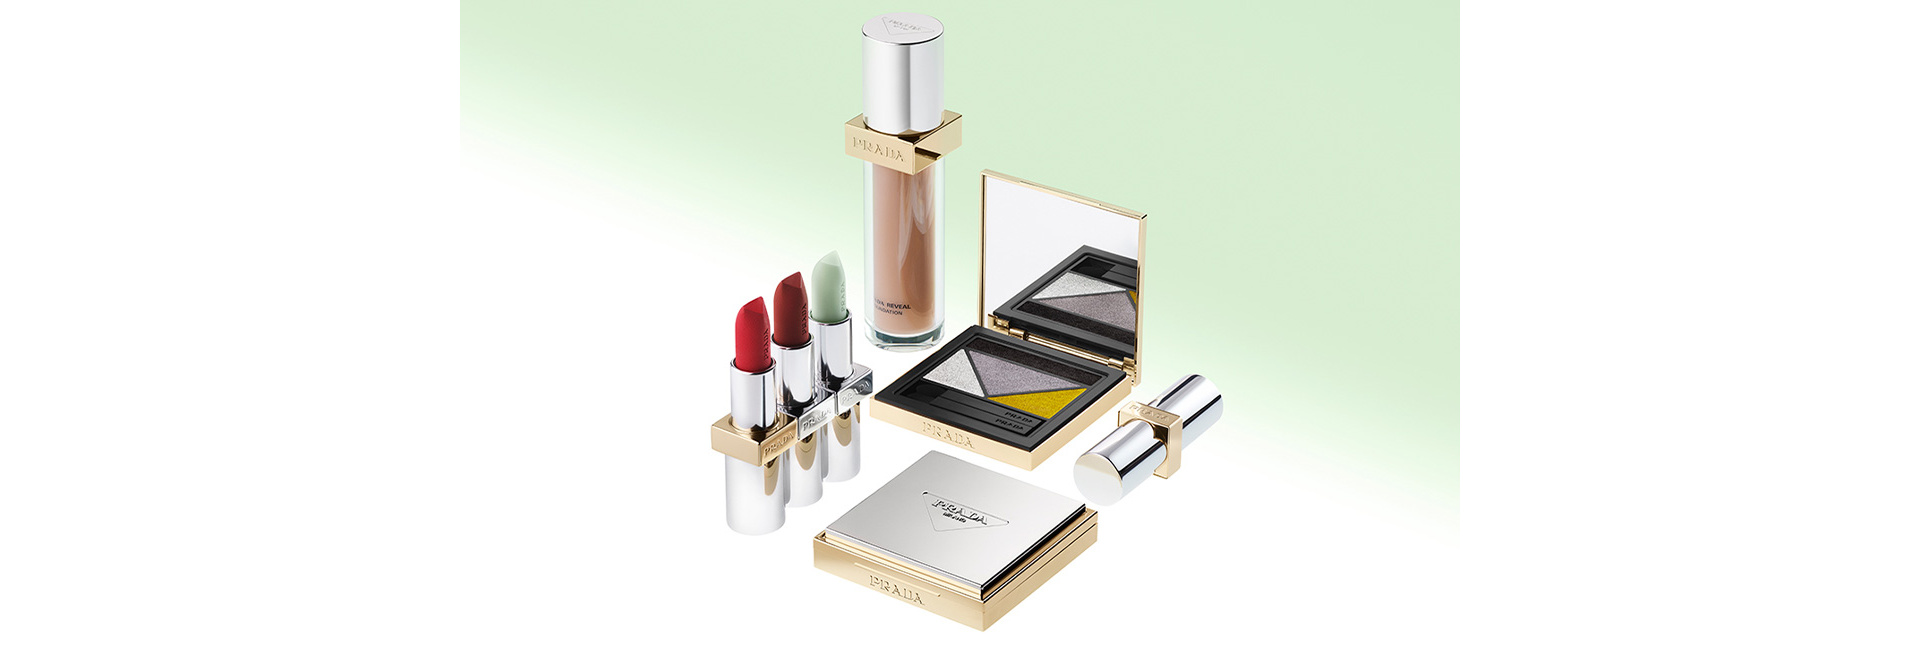 Prada Beauty: Discover the make up collection from Prada